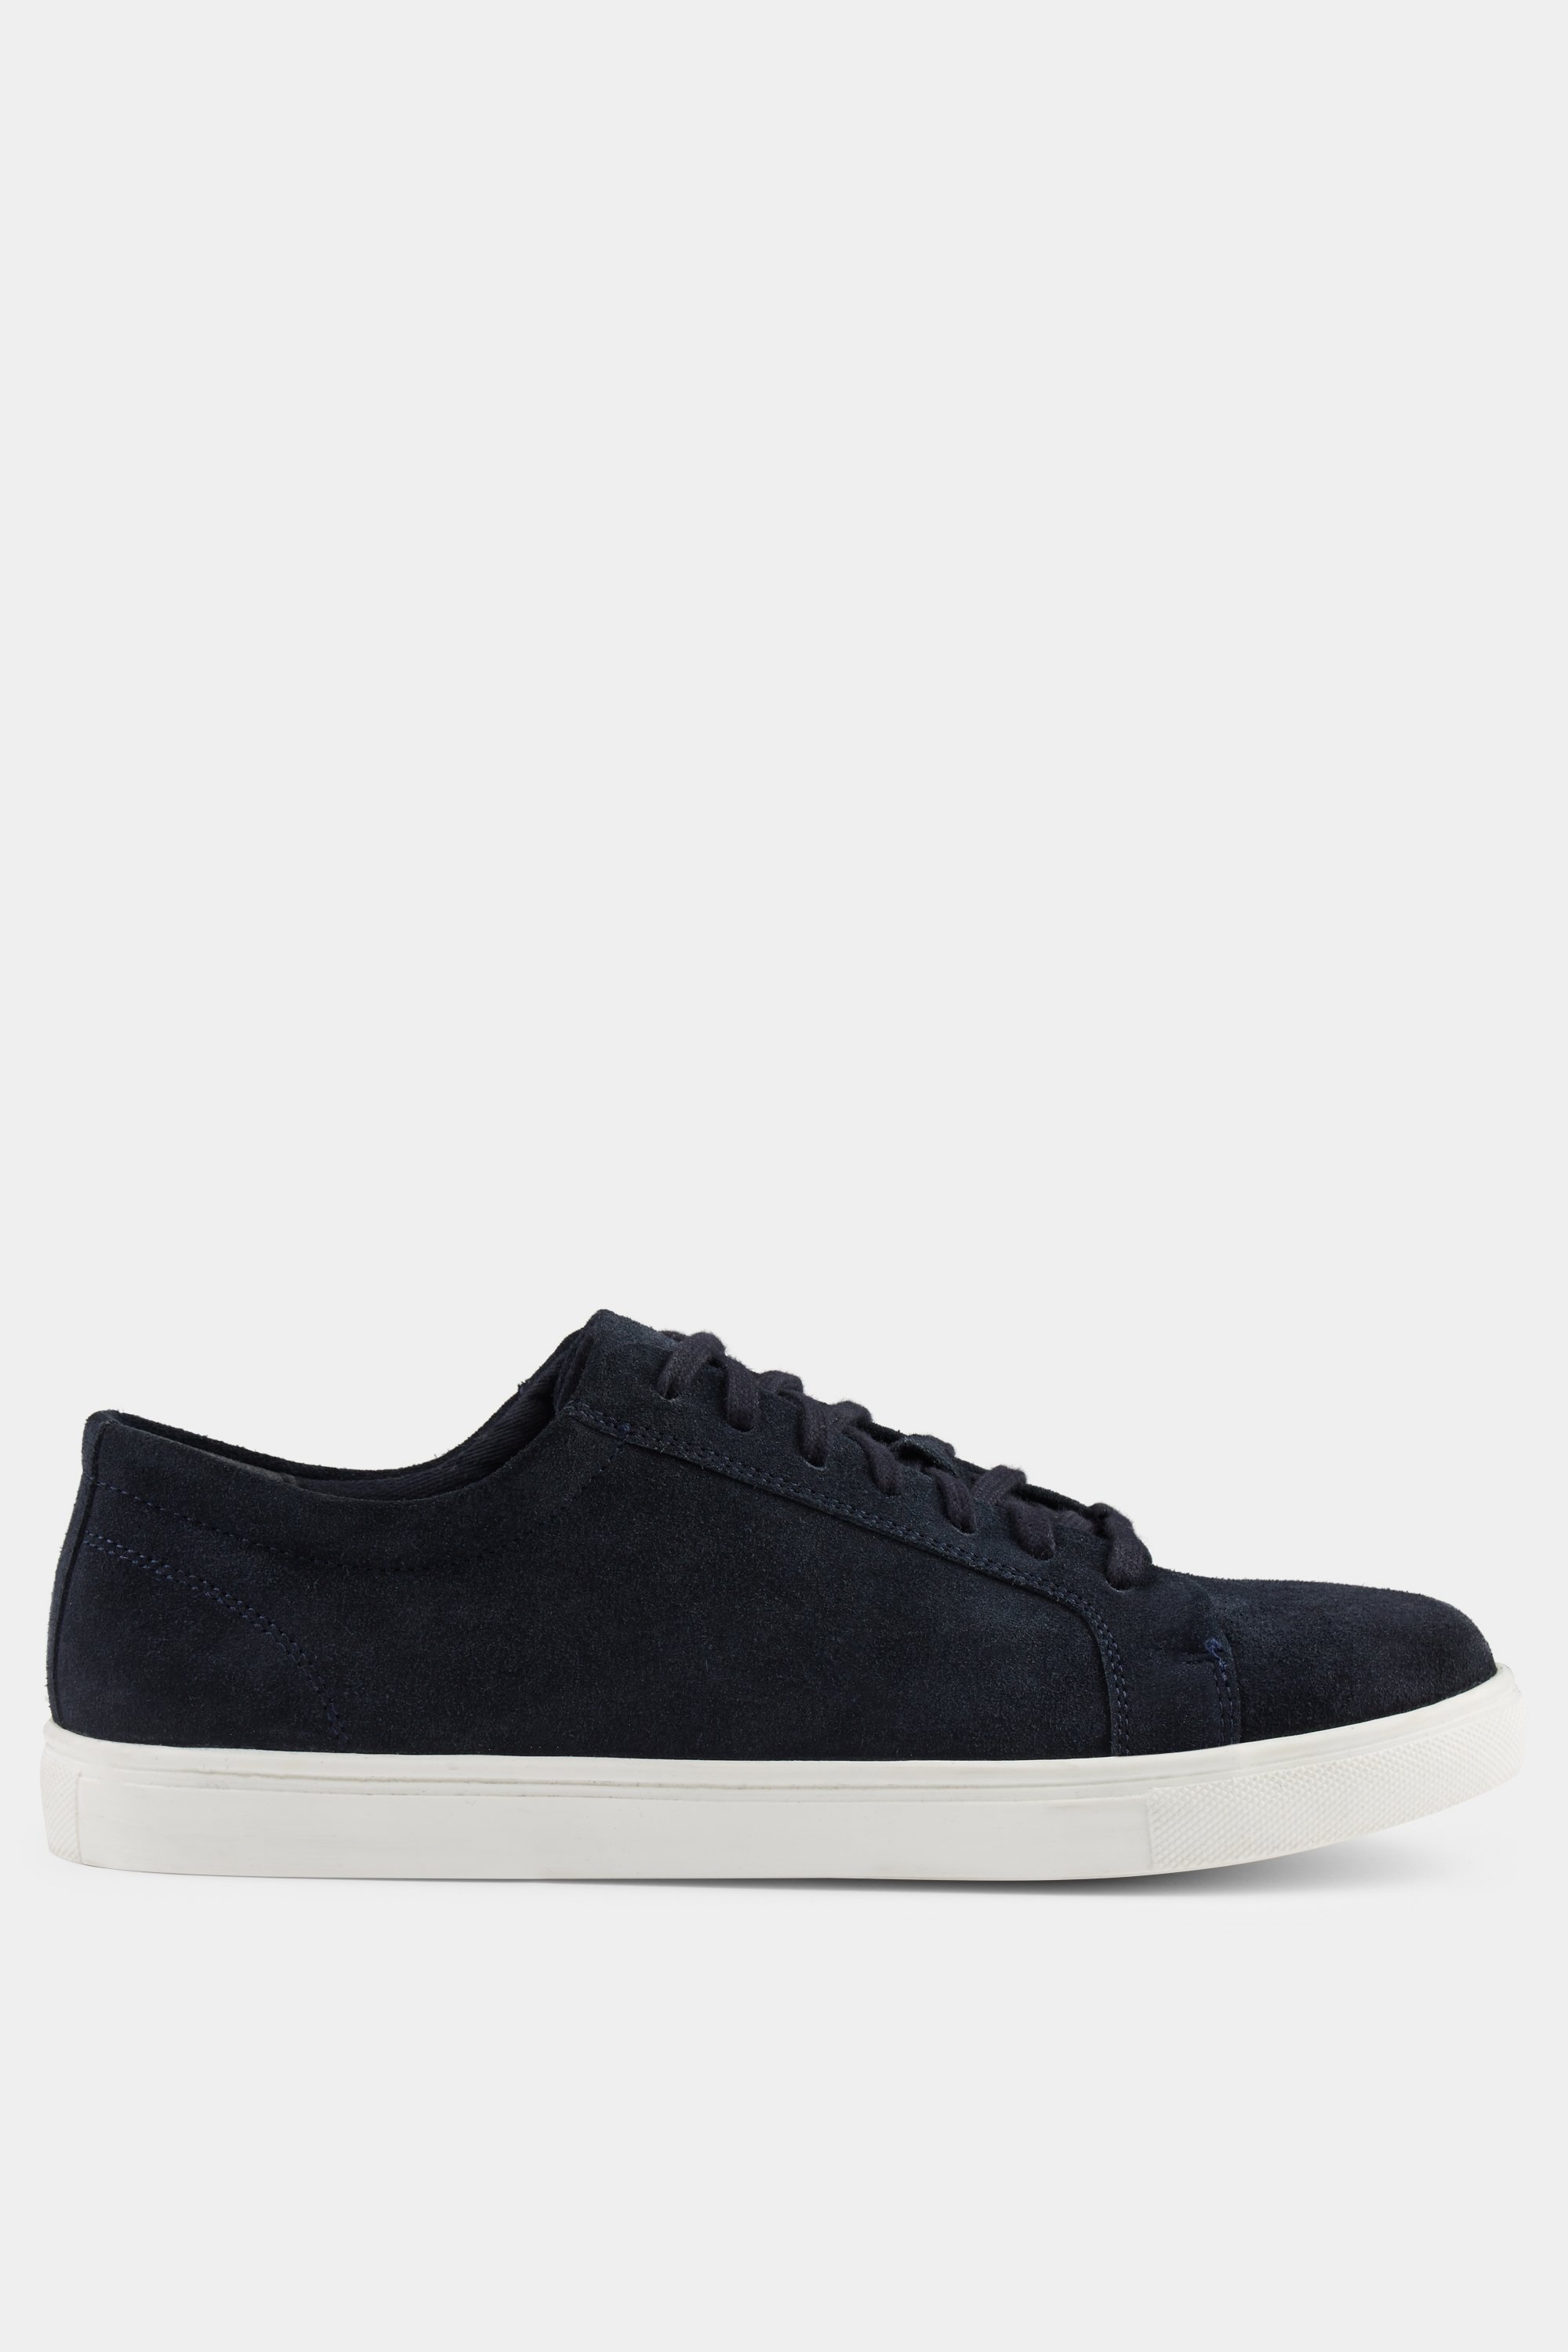 Moss London Stamford Navy Suede Trainer